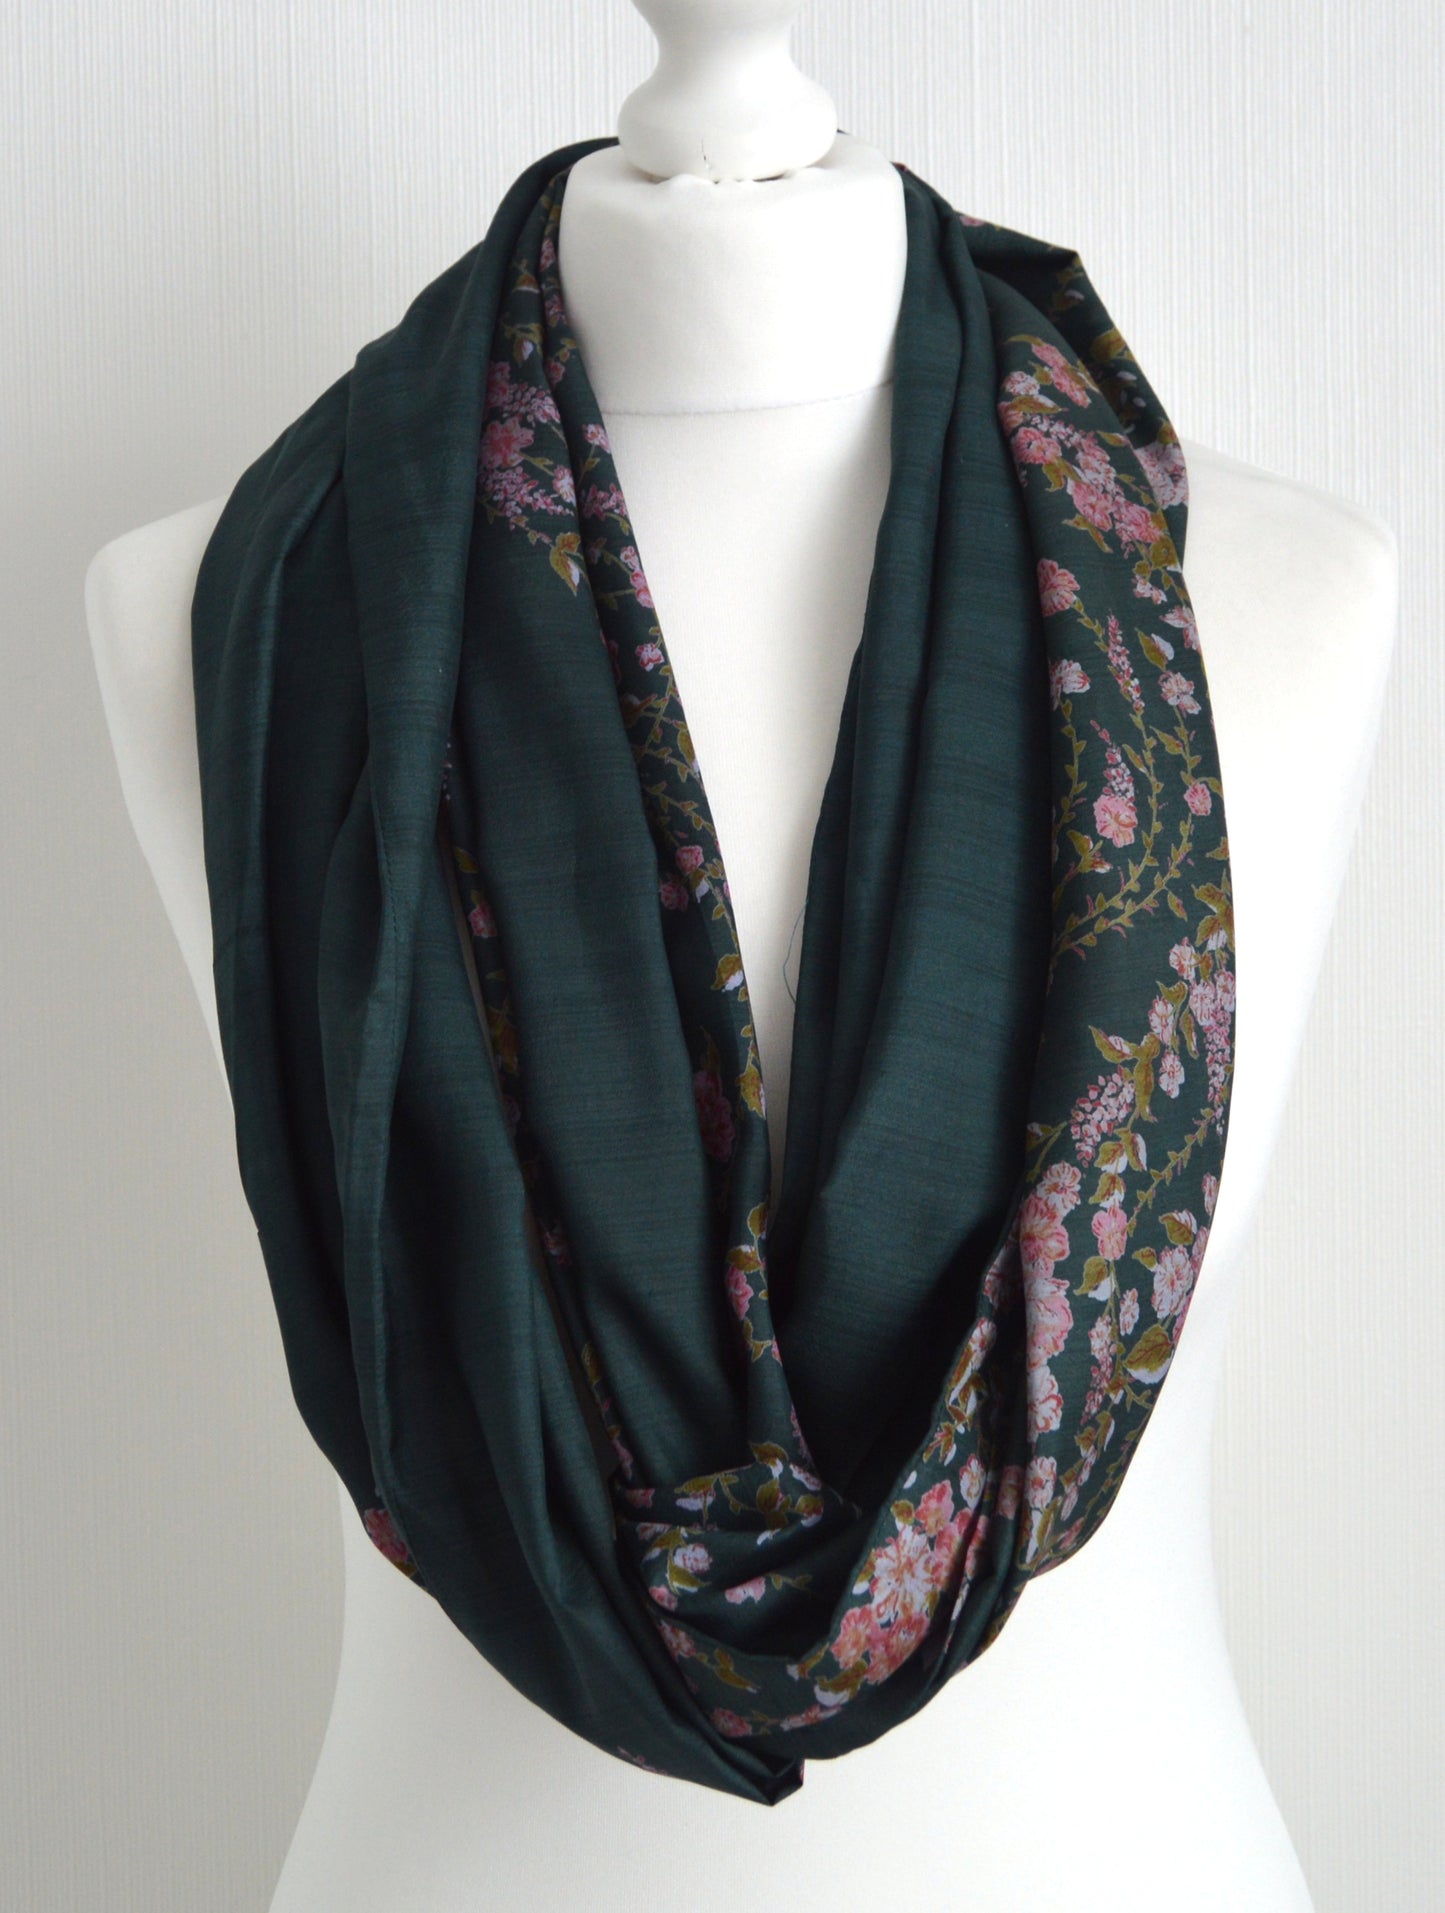 Green Floral Sari Silk Scarf - Boho Handmade Womens Scarf - Eco Friendly Autumn Fall Winter Trend Unique Upcycled Christmas Gift For Her